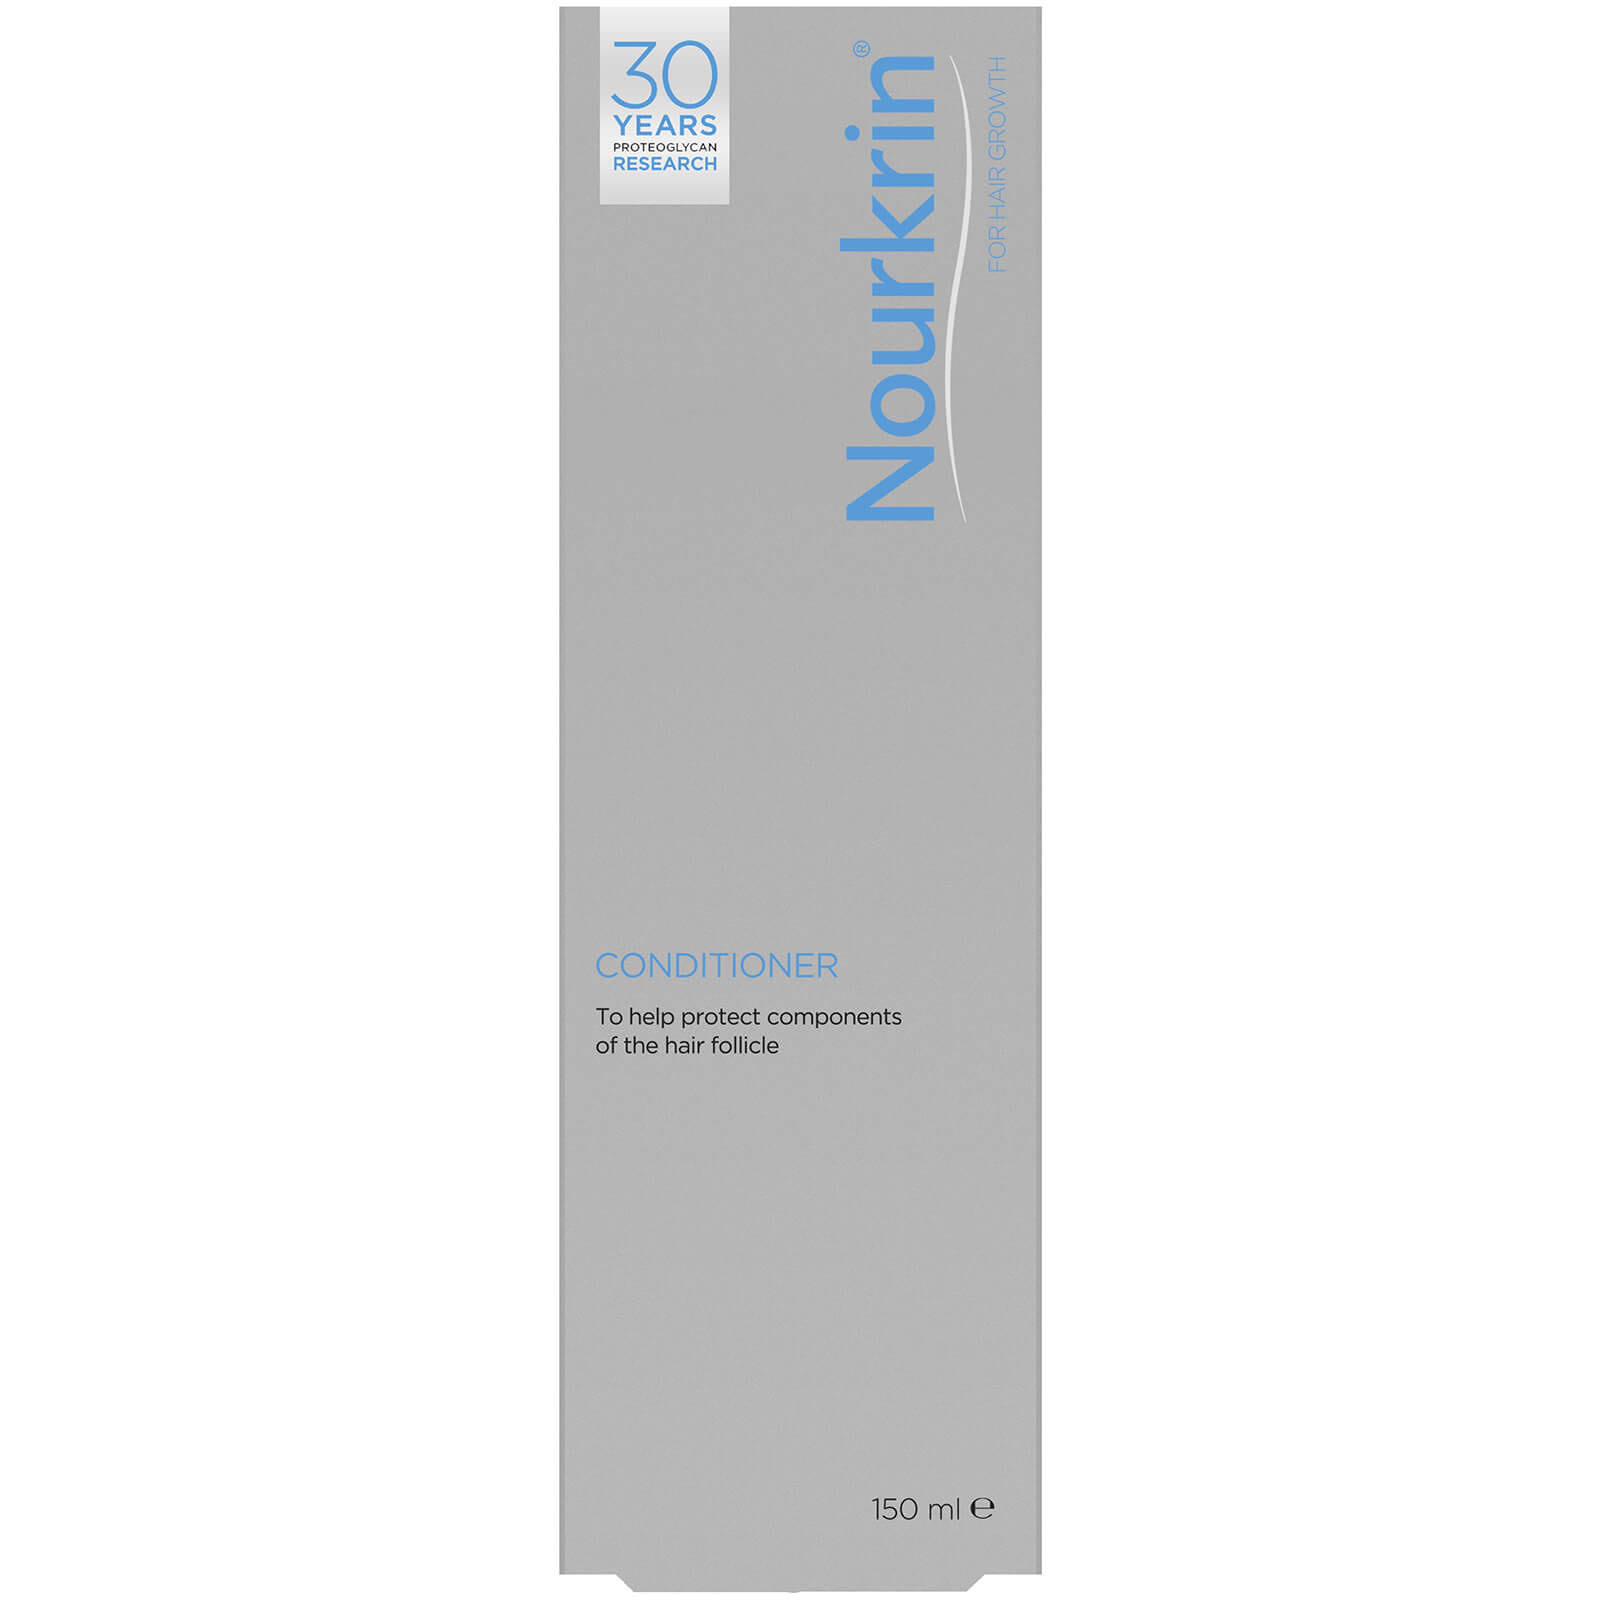 Nourkrin Conditioner for Hair Growth - 150ml